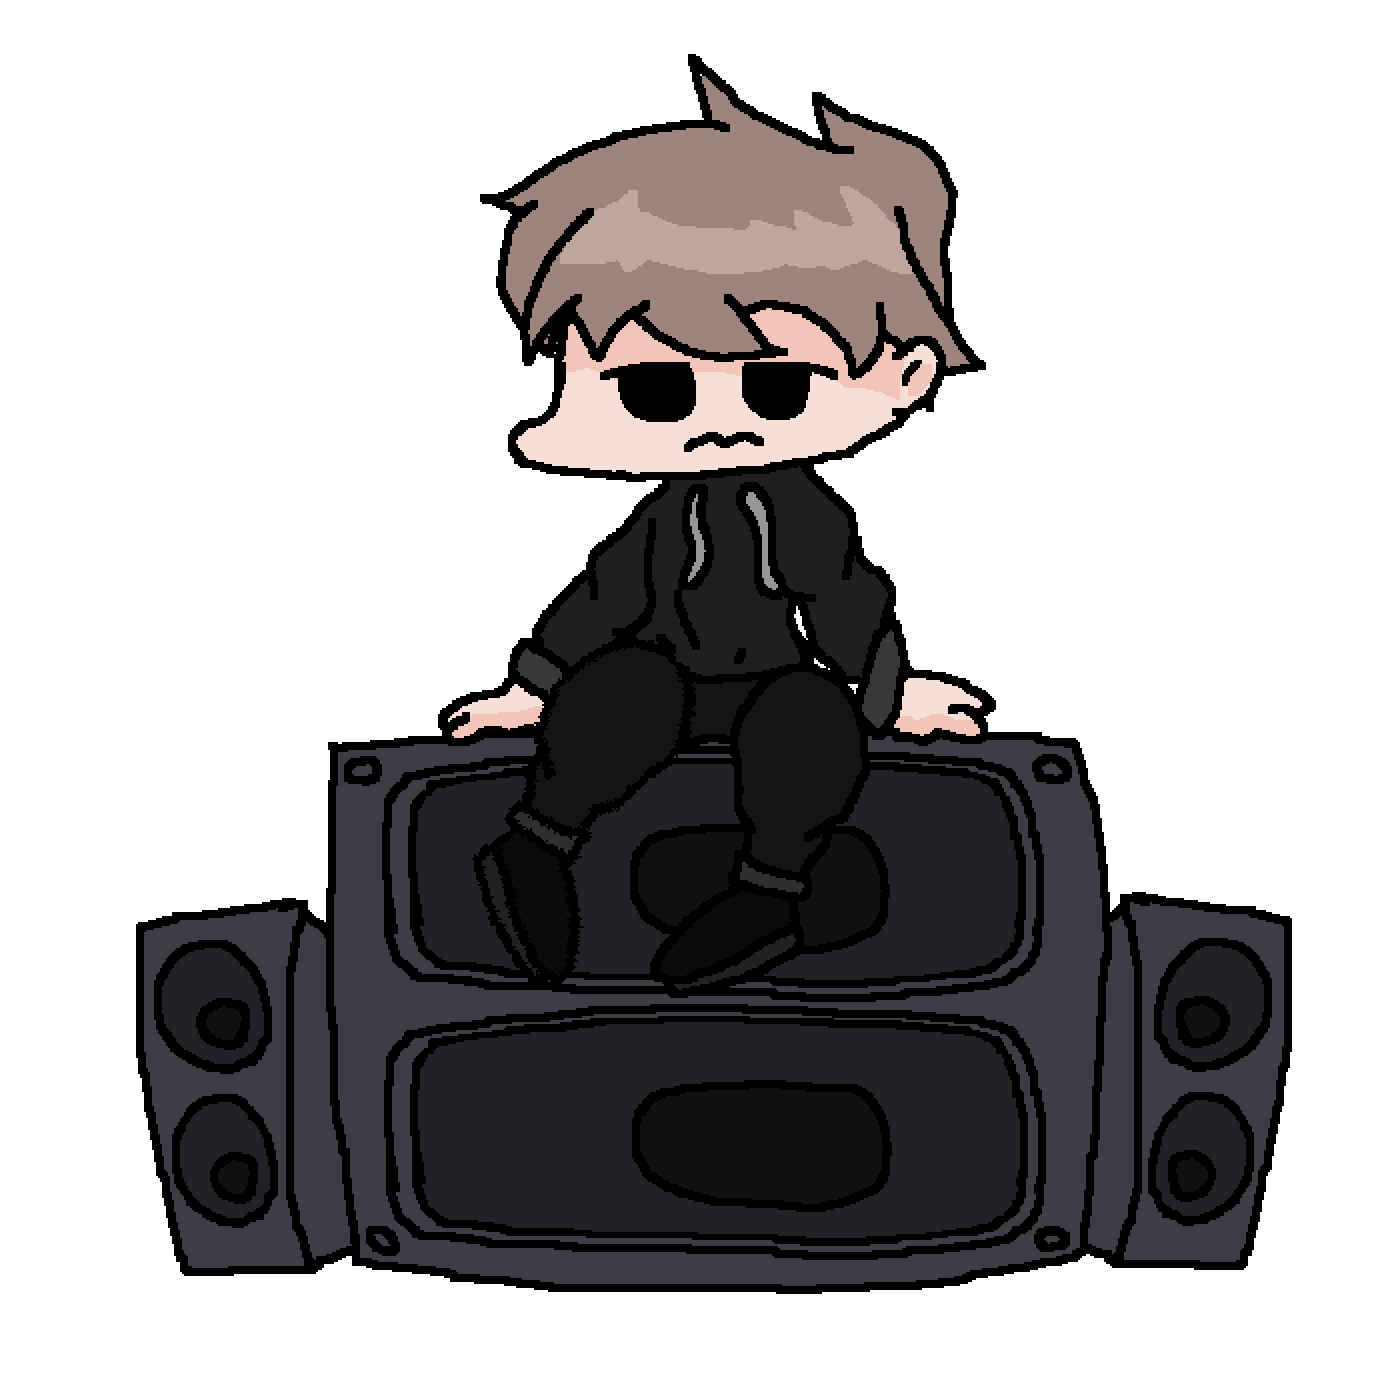 Boombox by Sm